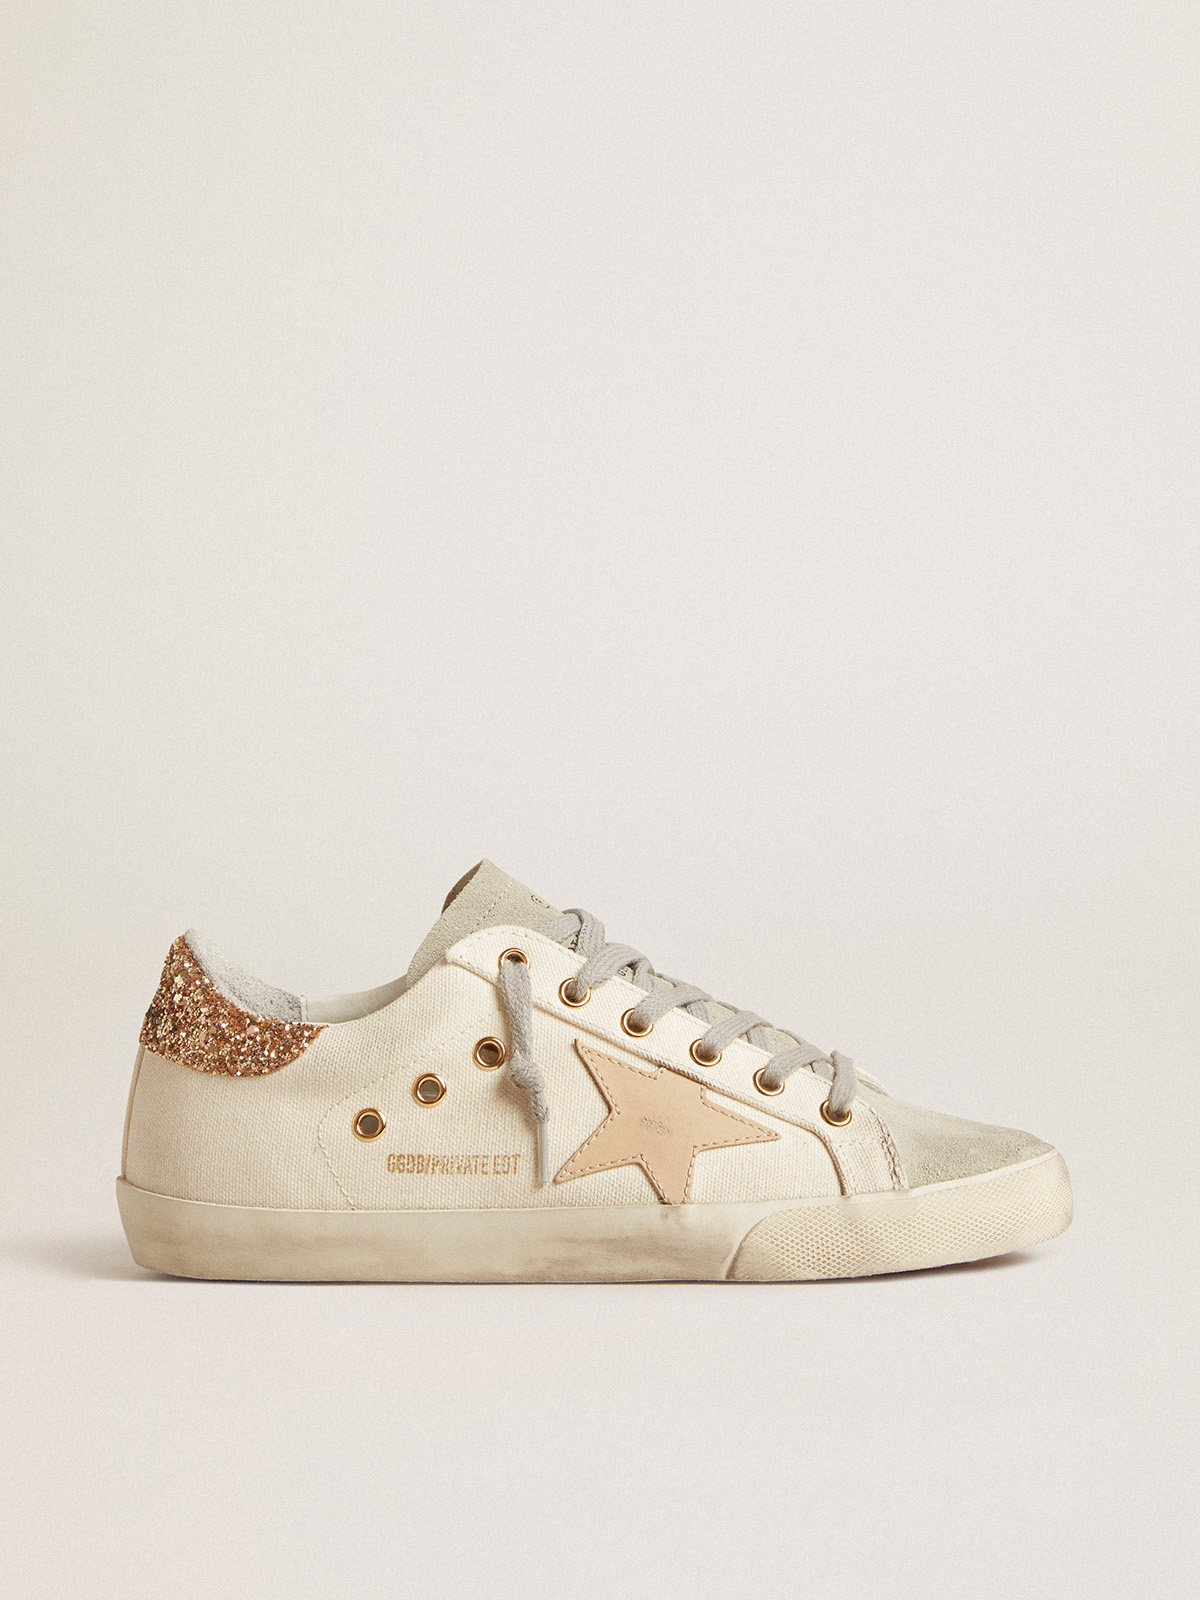 Super-Star LTD in canvas with sand star and glitter heel tab | Golden Goose